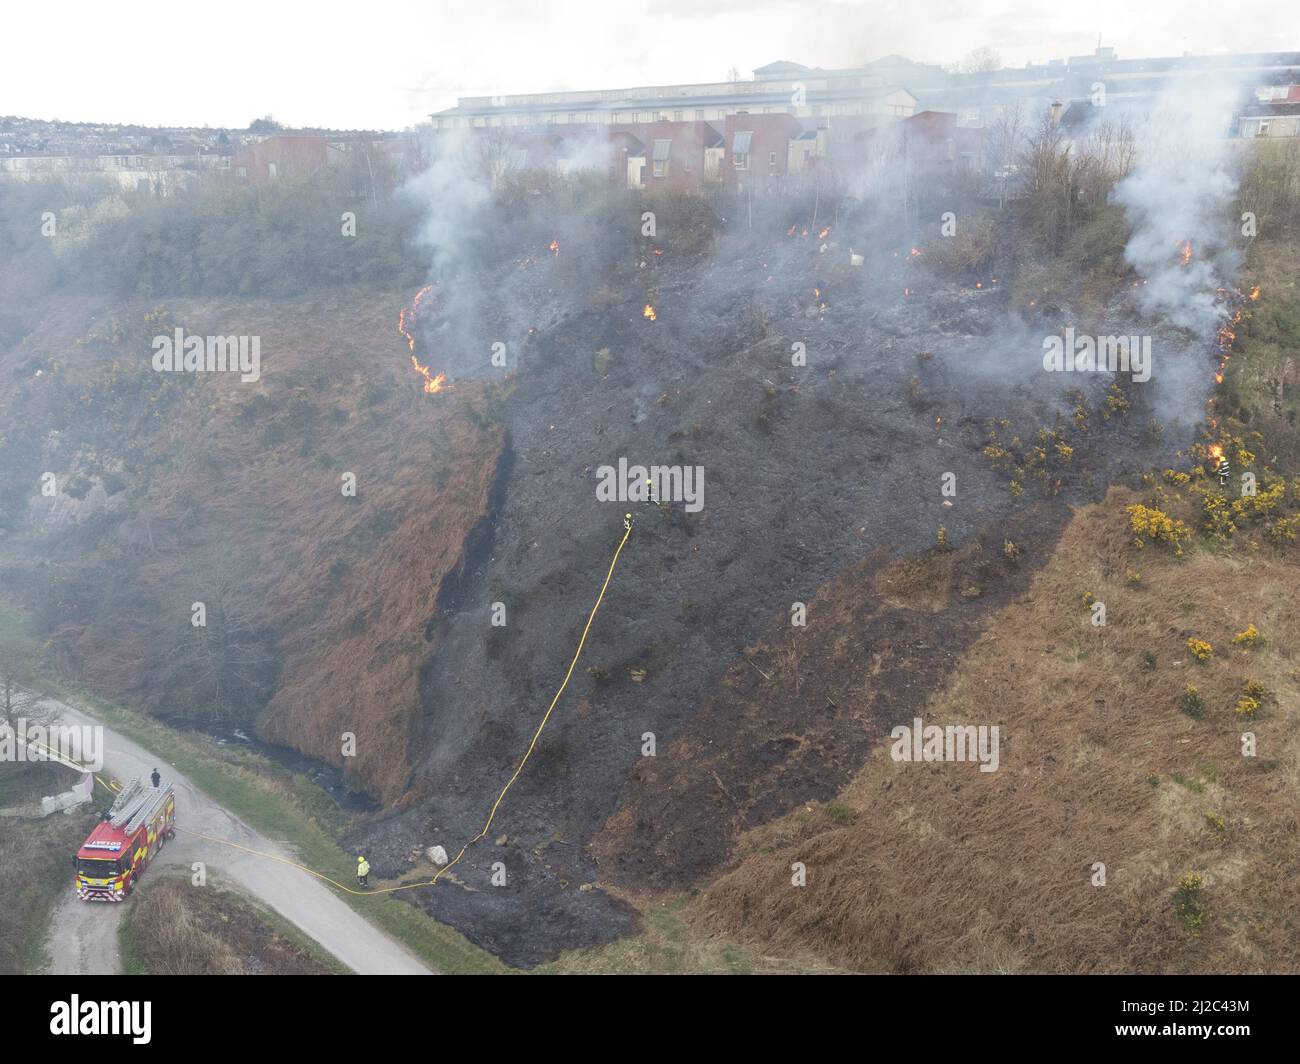 Cork, Ireland, 31st March 2022. Cork City Fire Brigade Deals with a Large Gorse Fire Near Houses in the Glen Park, Cork, Ireland. Aerial photo of members of the Cork City Fire Brigade dealing with another large gorse fire burning close to houses in the Glen River Park which runs between the Glen and Ballyvolane. Shortly after 6 pm this evening Cork City Fire Brigade attended the scene of a large gorse fire burning close to houses in Glen River Park, the smoke from this fire blew directly into the houses in the Glen area above Glen Park. A number of firefighters could be seen attending th Stock Photo